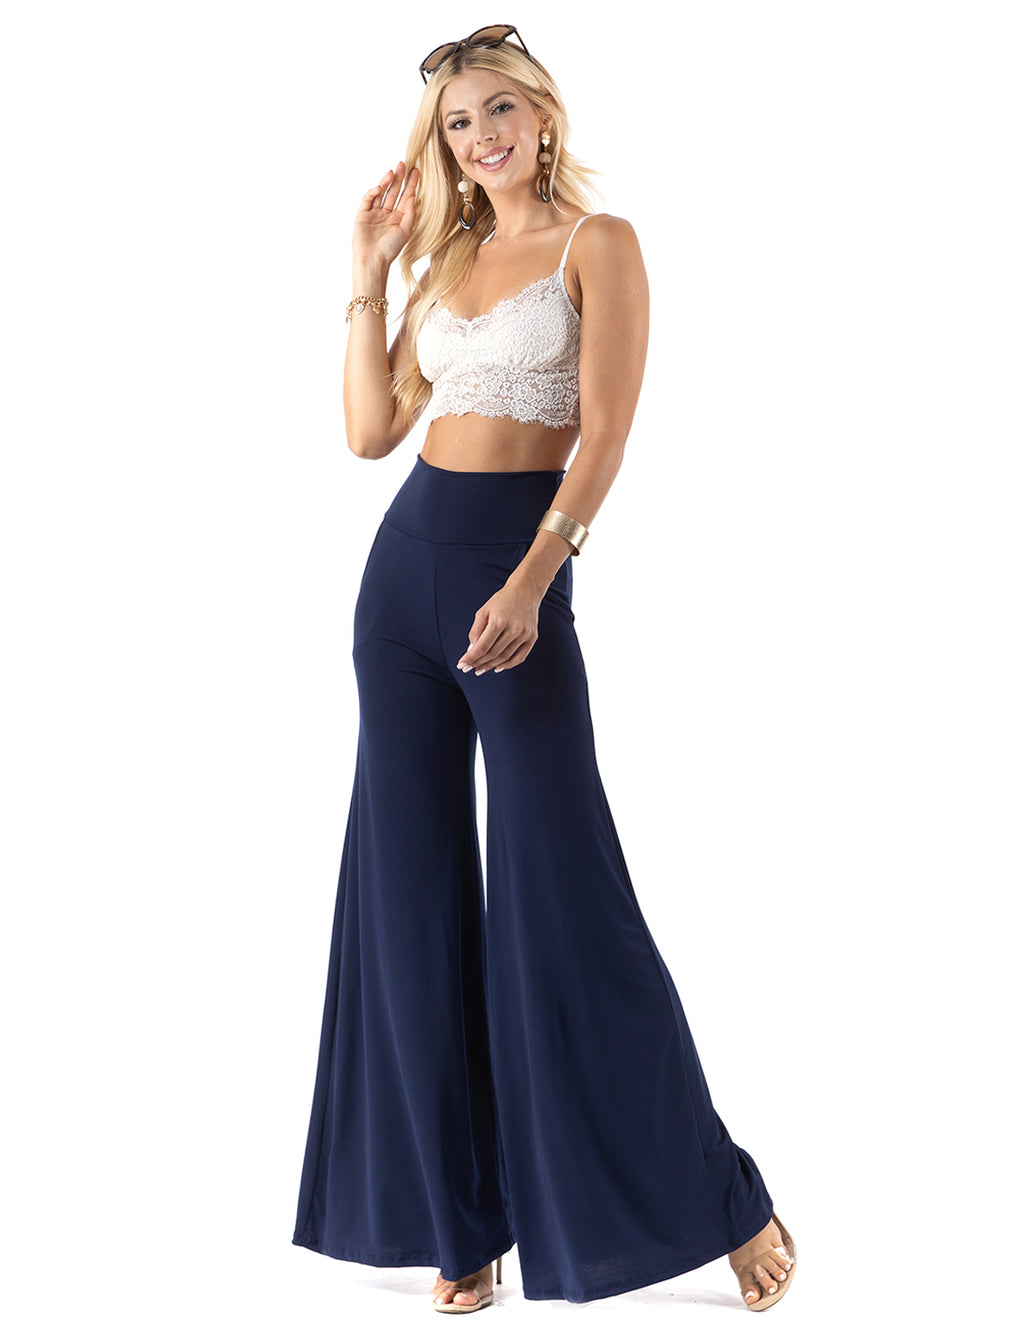 Beautiful woman wearing this amazing Navy High waist palazzo pants featuring pockets, wide legs, and a comfortable stretchy fabric Perfect during spring, summer,Concerts, Festivals, Dance, Brunch, Shopping, Weekend Getaway,Evening wear, Beach Day, Vacation, Dance, Poolside Parties,Casual day